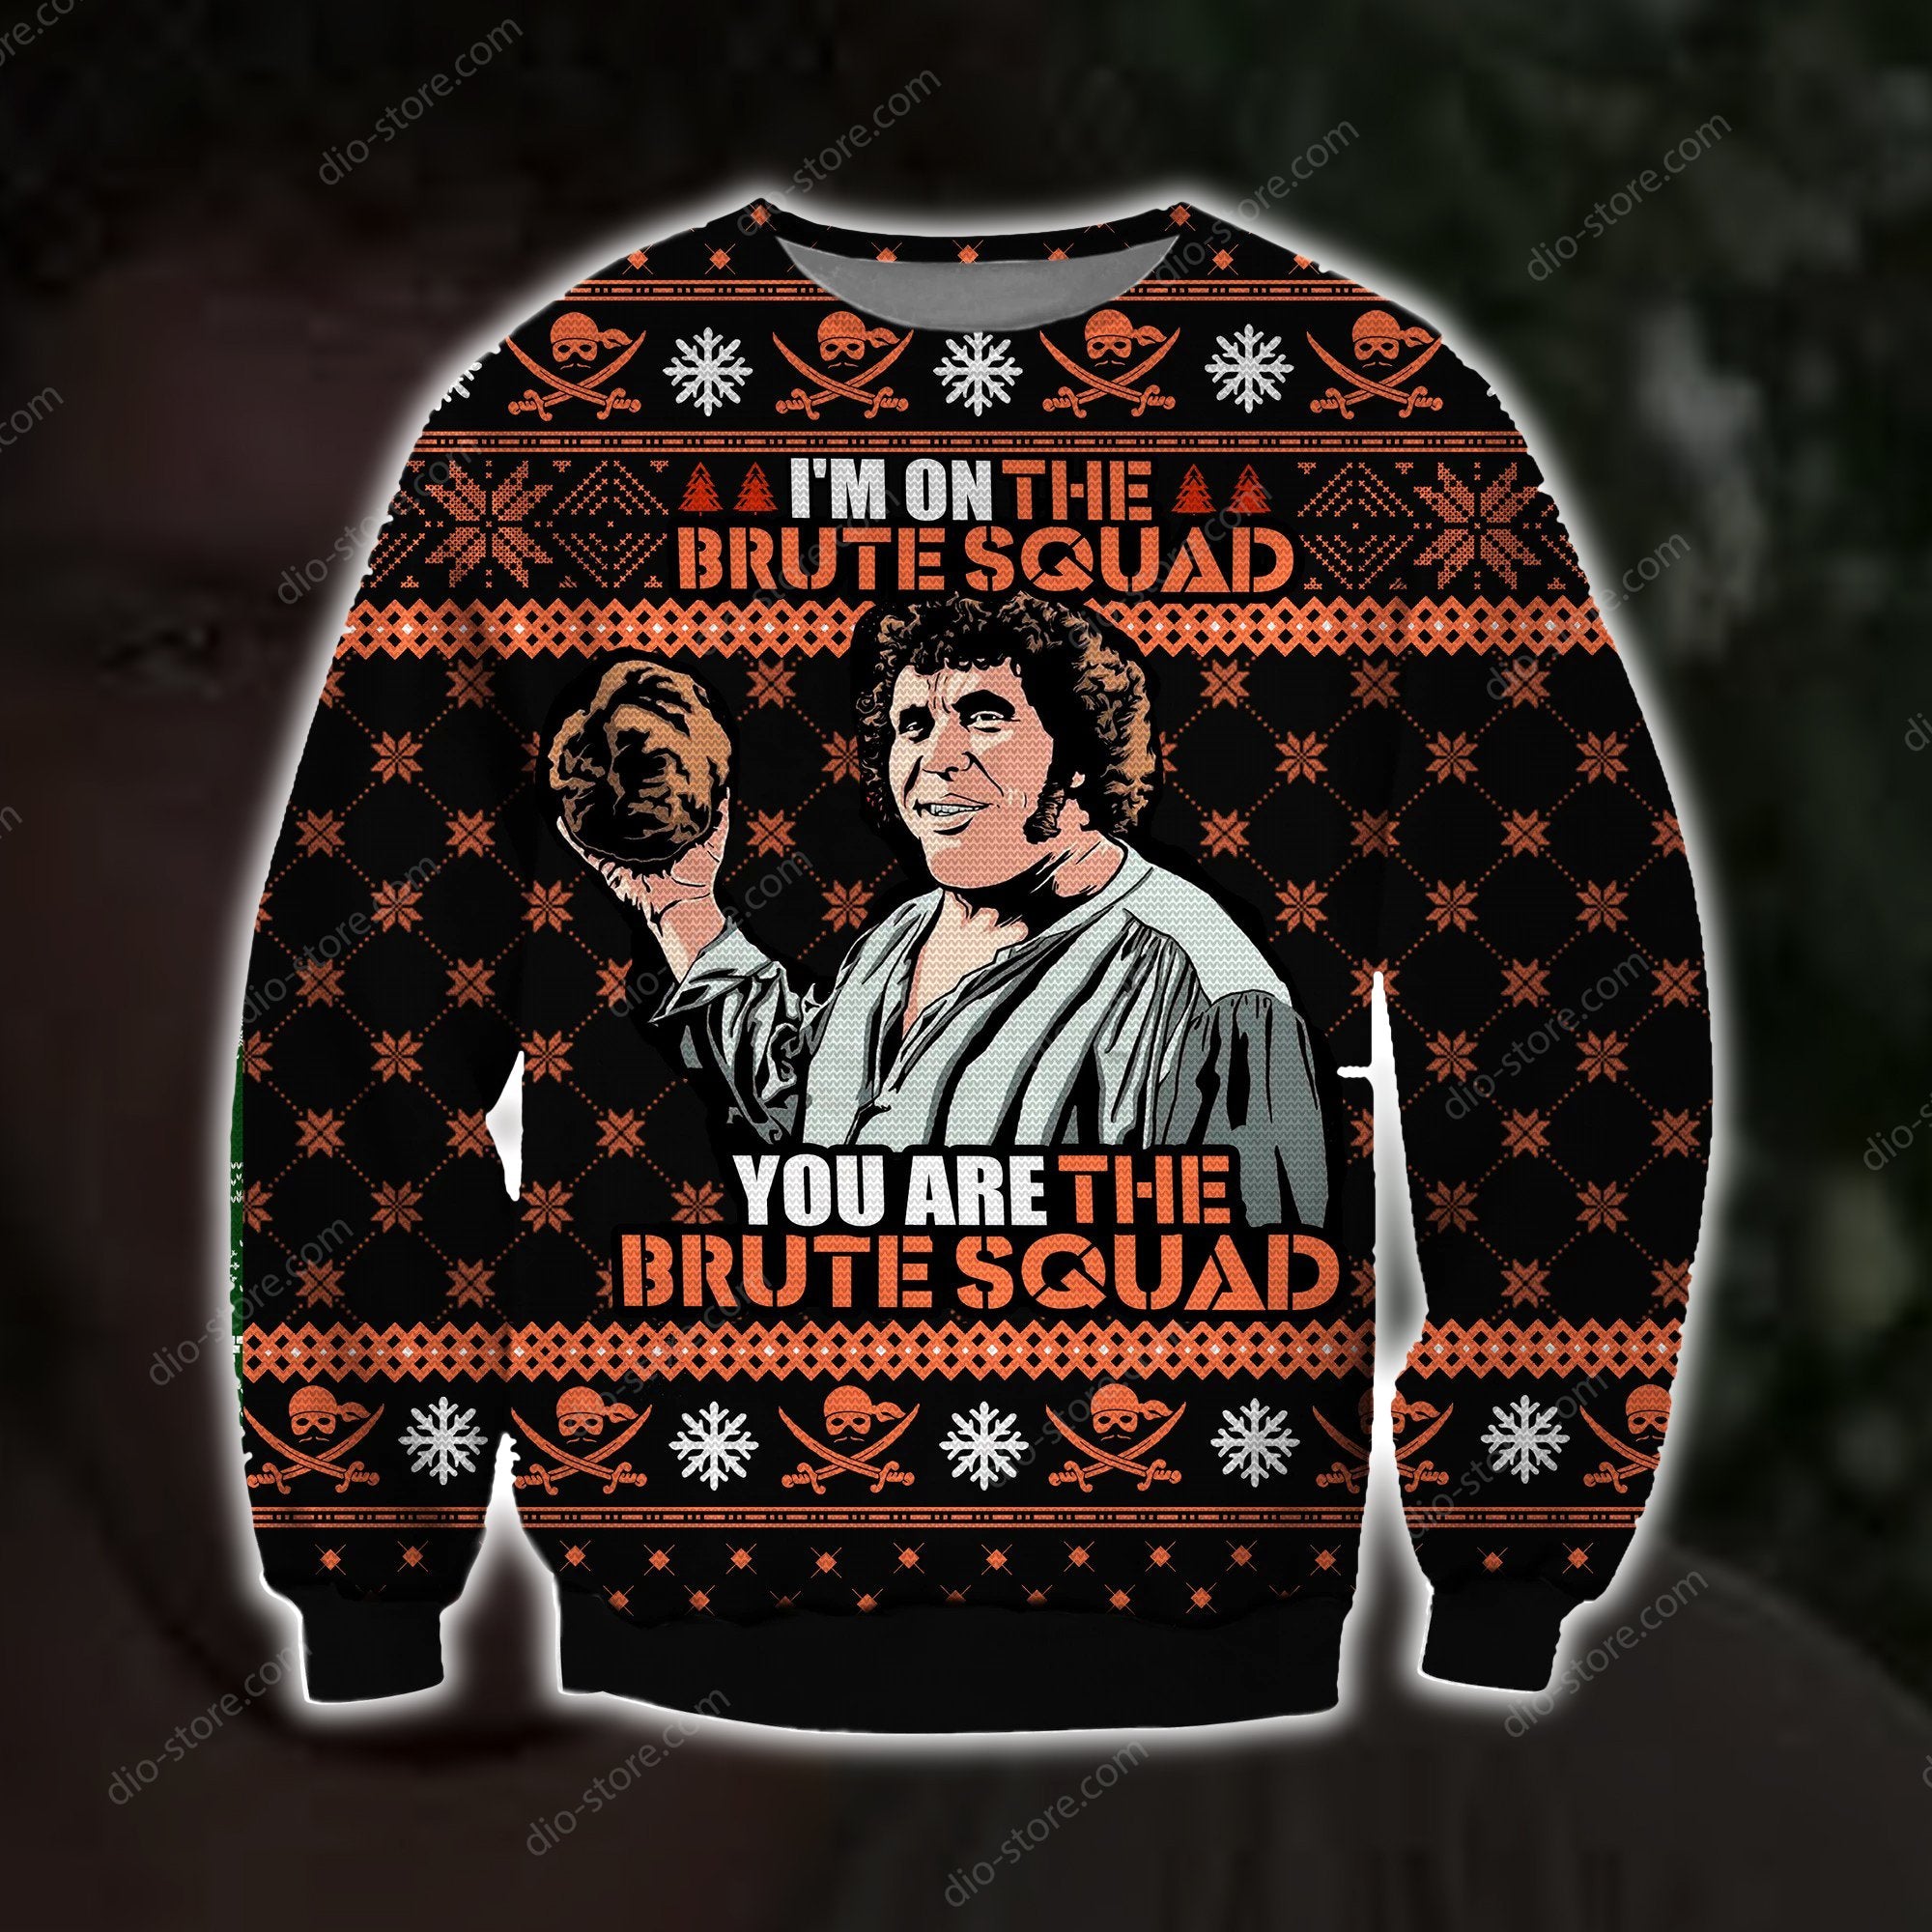 You Are The Brute Squad Knitting Pattern 3D Print Ugly Christmas Sweater Hoodie All Over Printed Cint10646